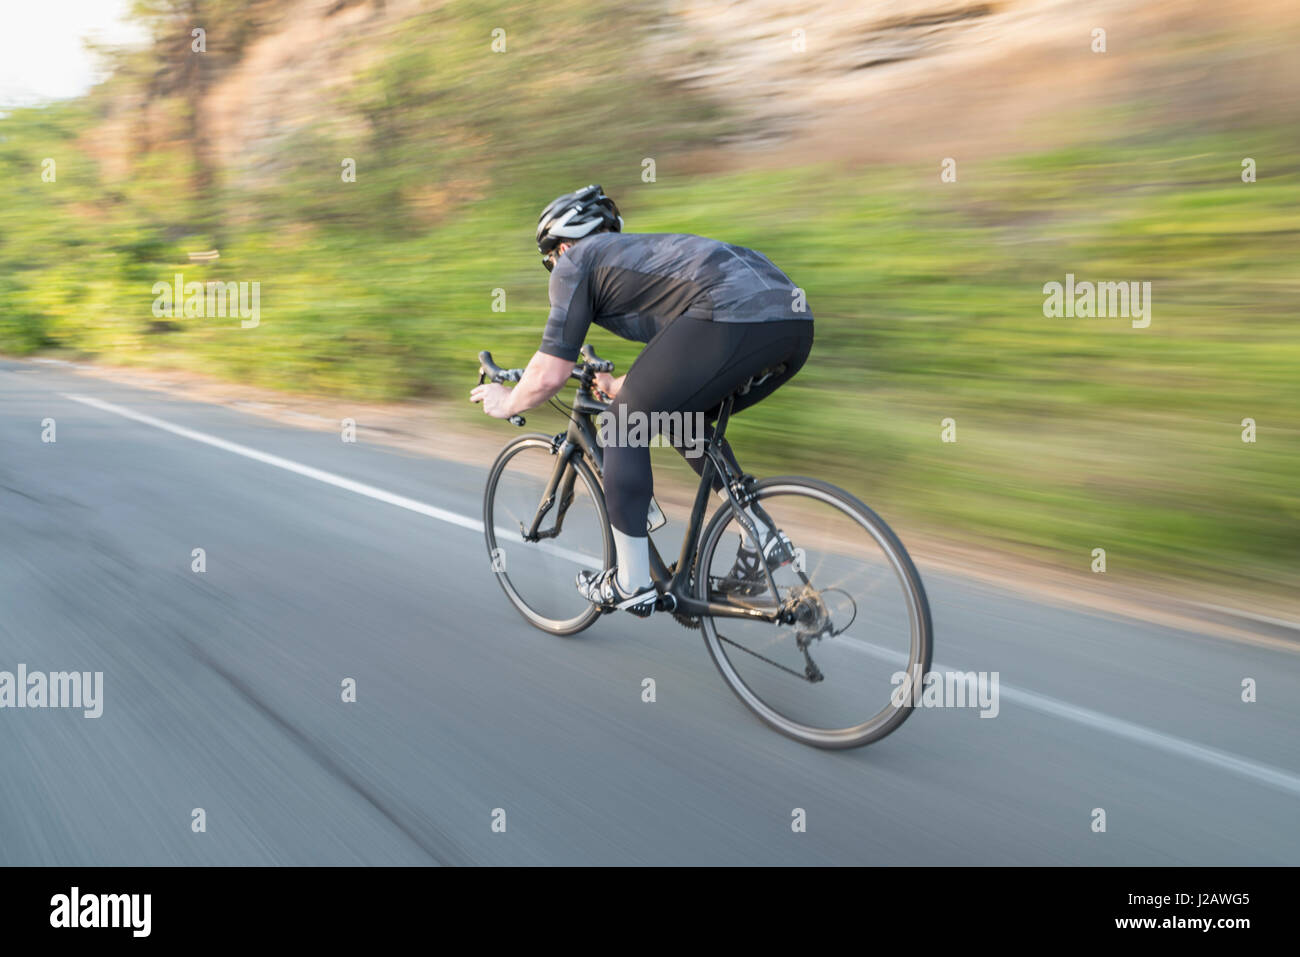 Blurred motion view of man cycling on country road Banque D'Images